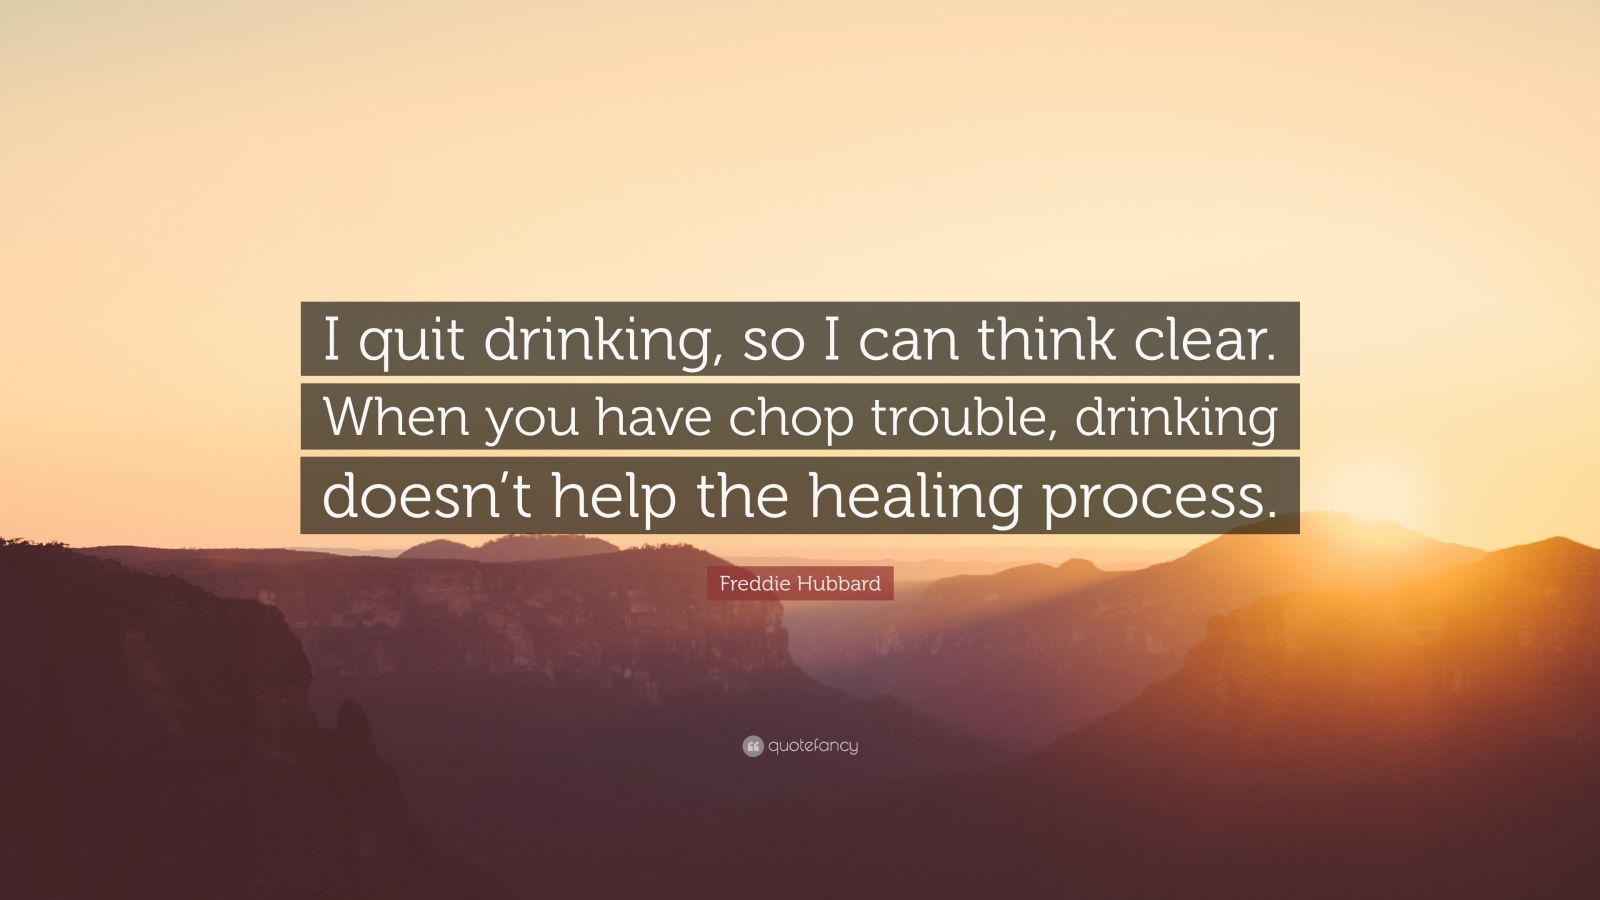 Freddie Hubbard Quote: “I quit drinking, so I can think clear. When you